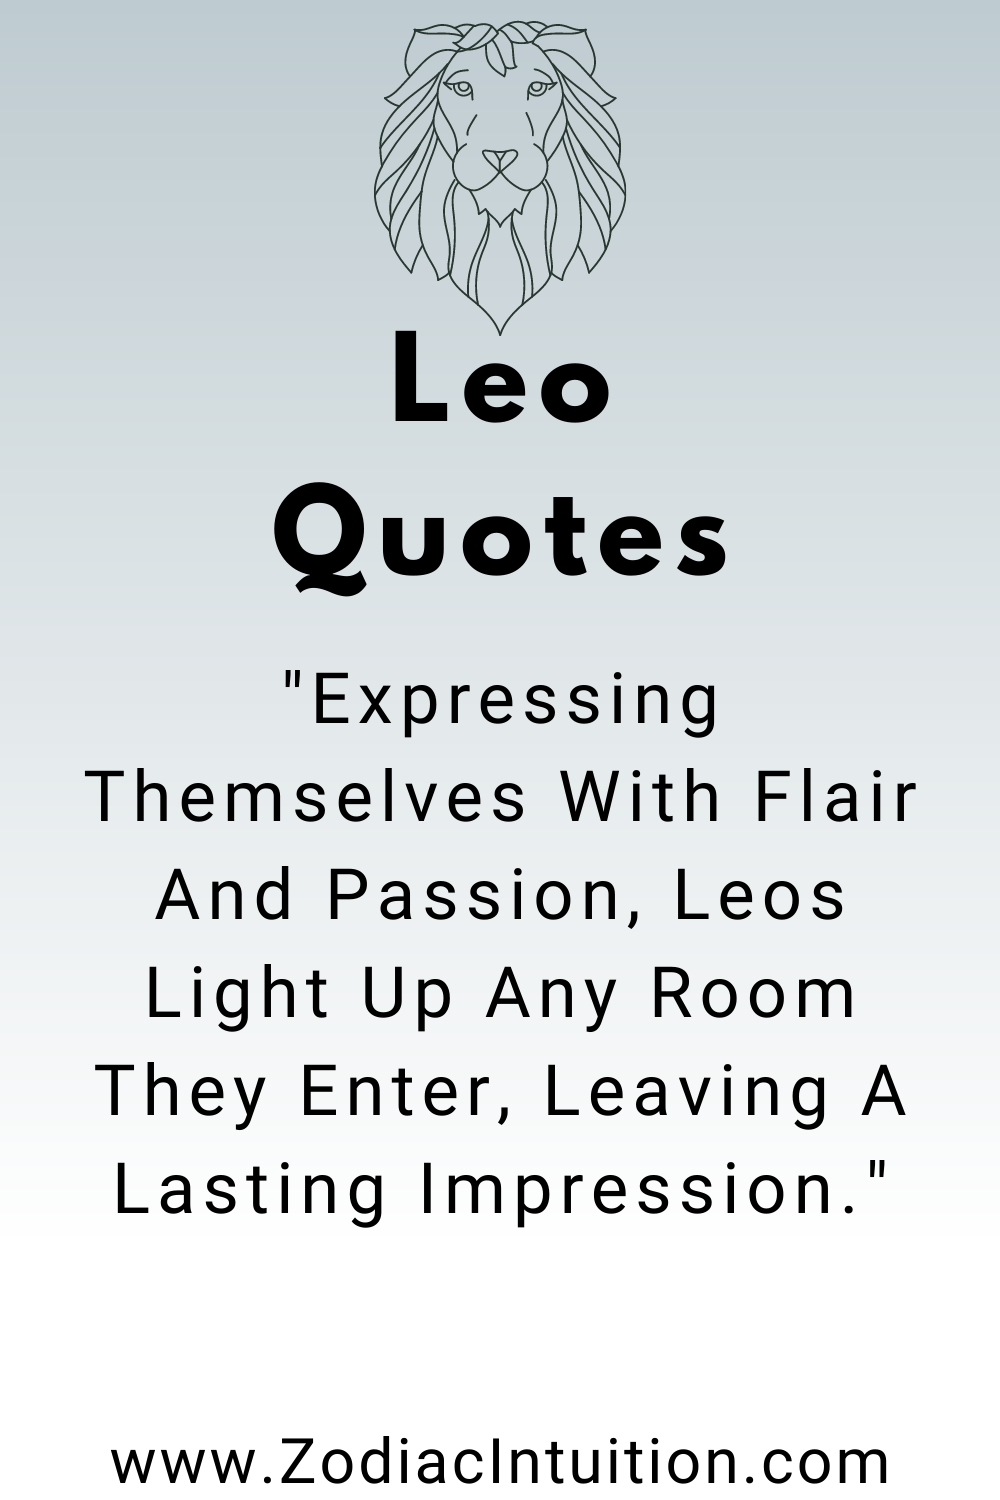 Top 5 Leo Quotes And Inspiration